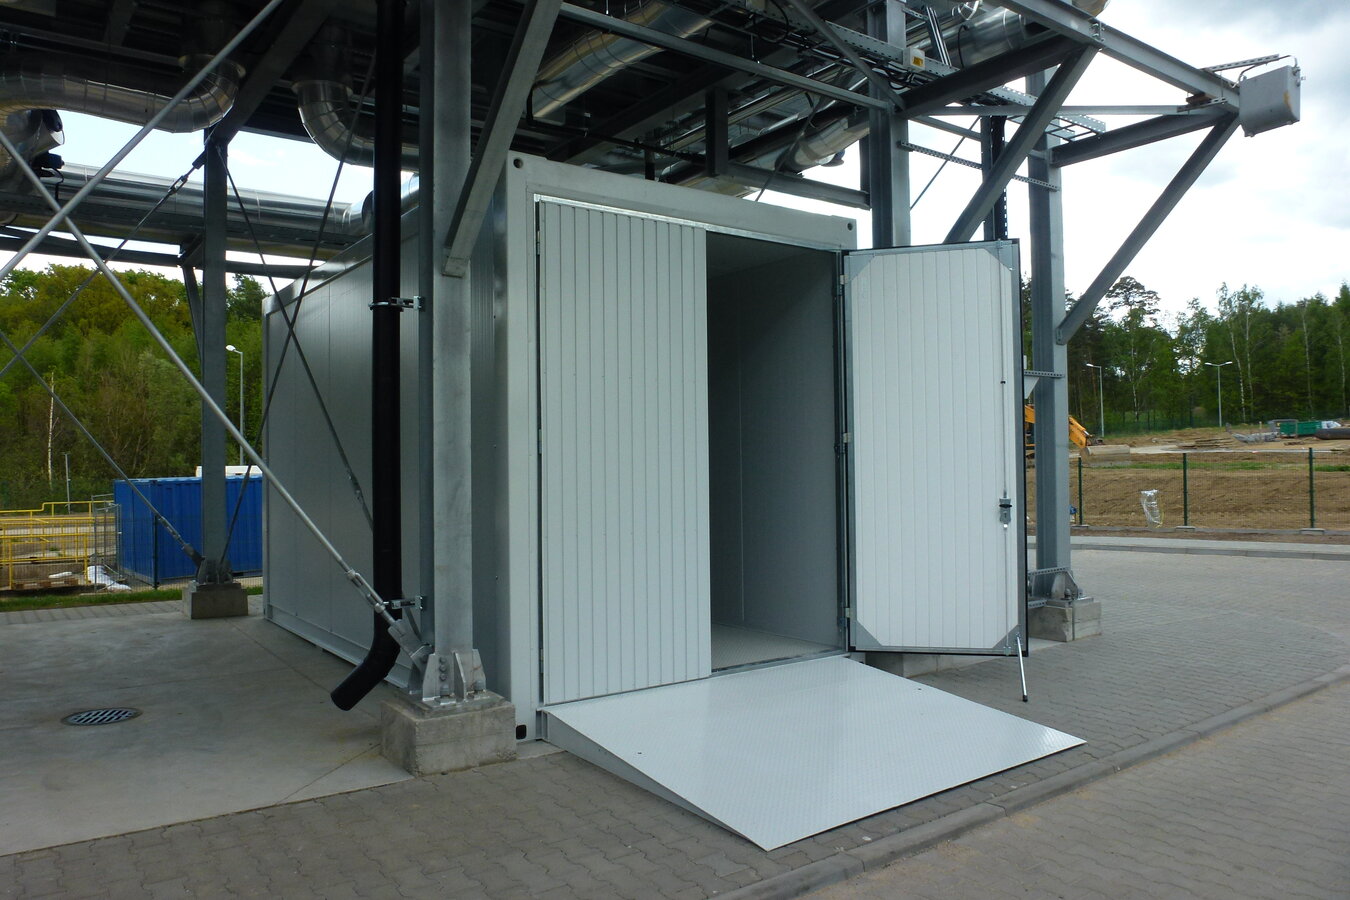 Technical prefabricated infrastructure